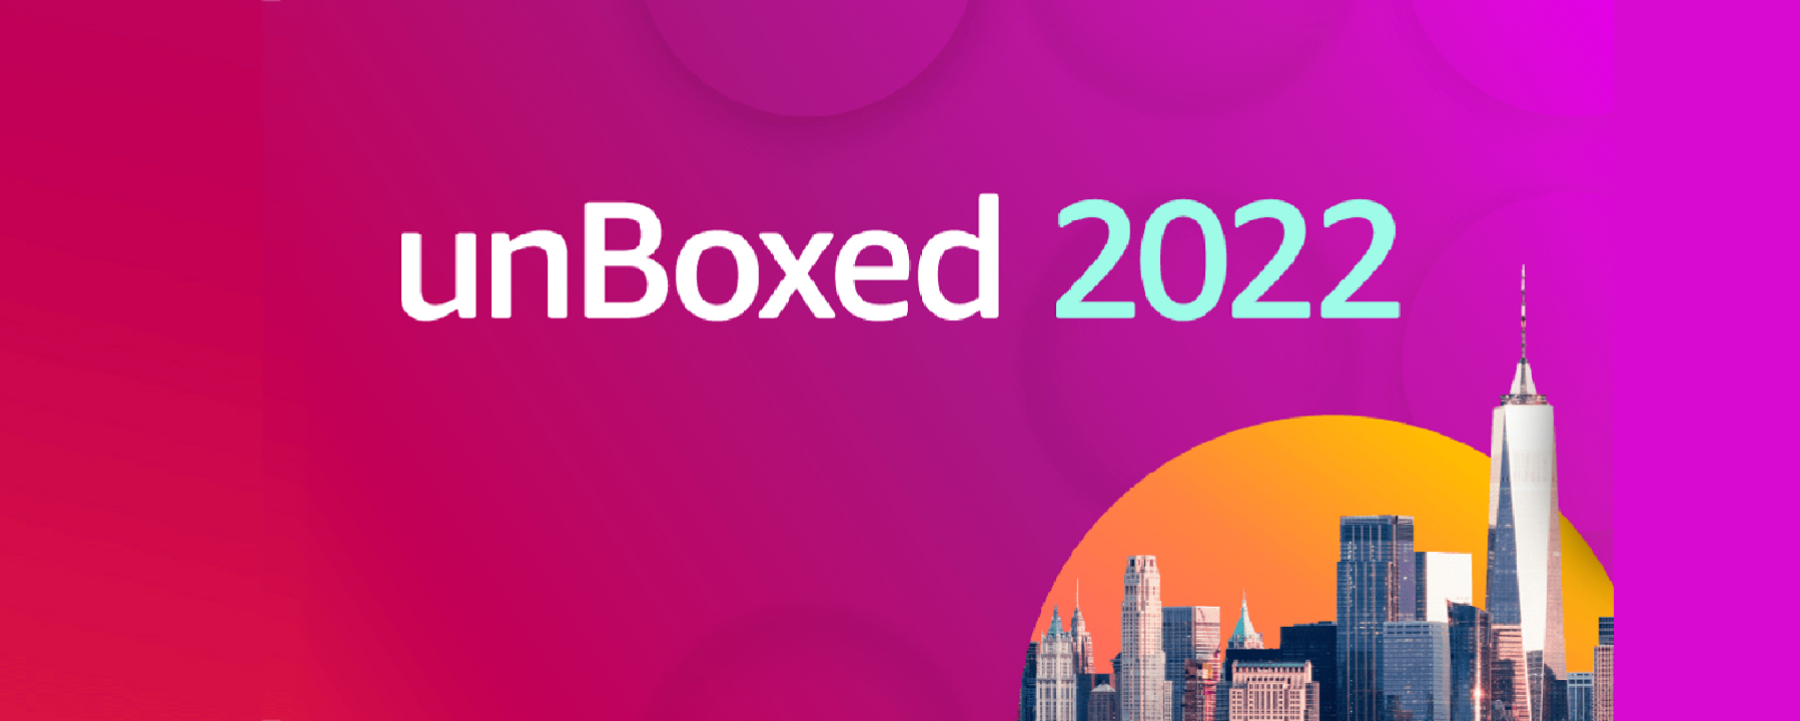 unBoxed 2022